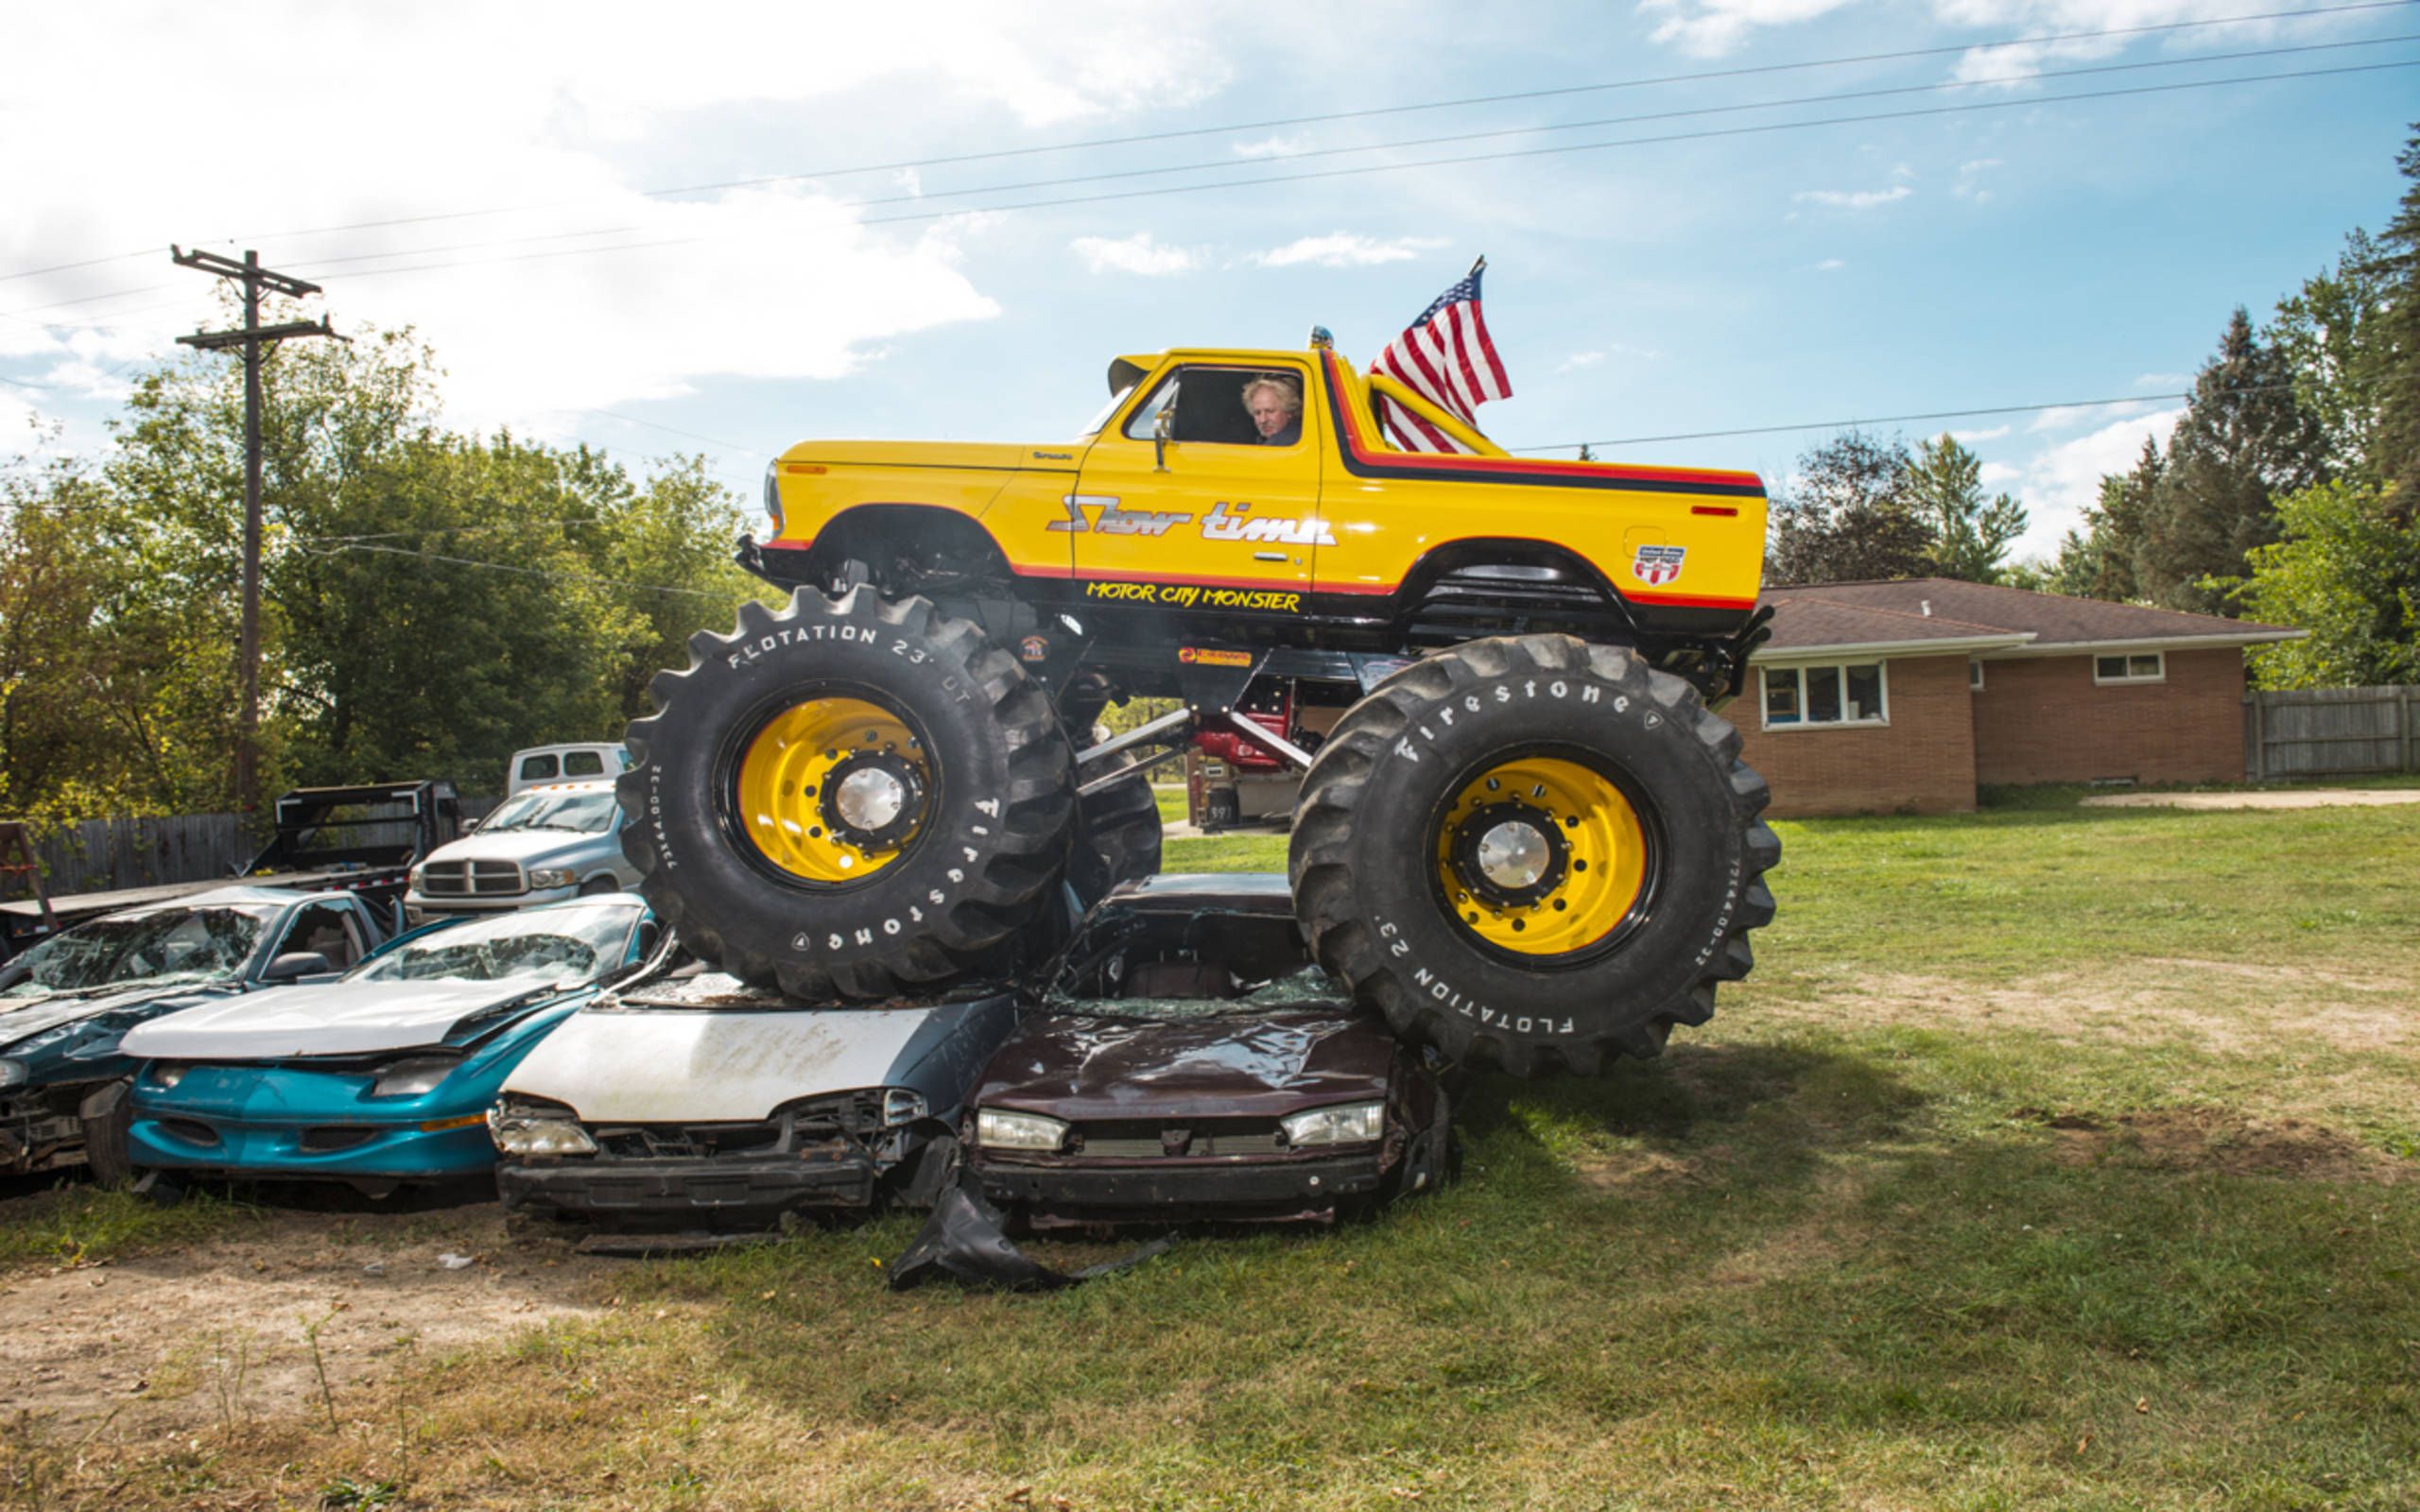 Showtime monster truck: Michigan man re-creates one of the coolest